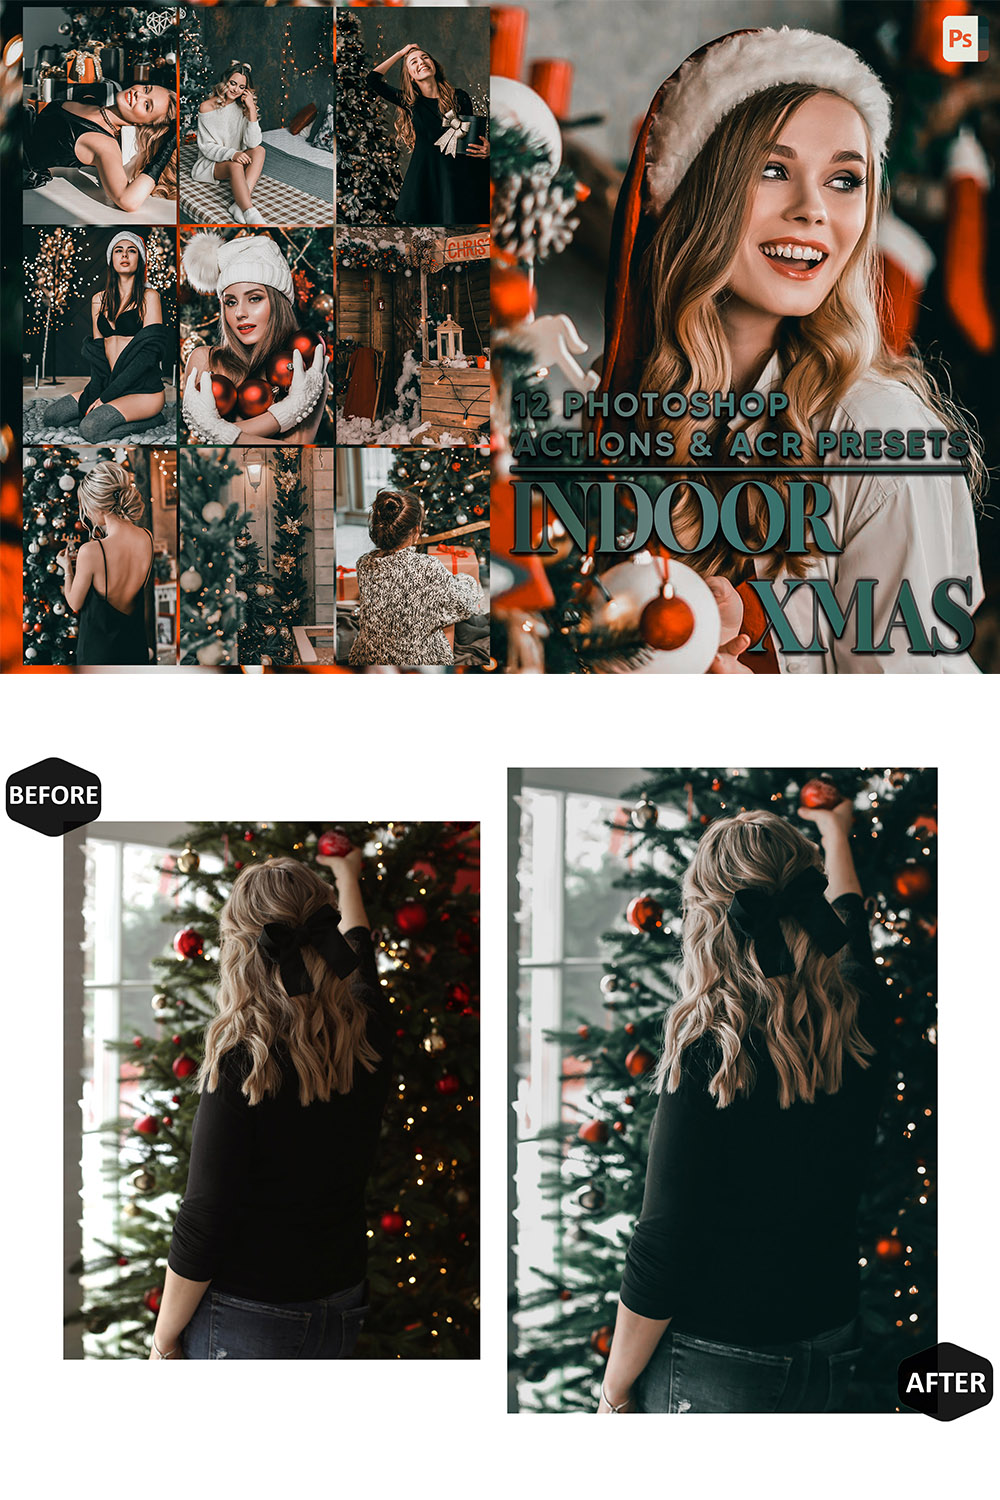 12 Photoshop Actions, Indoor Xmas Ps Action, Christmas ACR Preset, Holiday Ps Filter, Atn Portrait And Lifestyle Theme For Instagram, Blogger pinterest preview image.